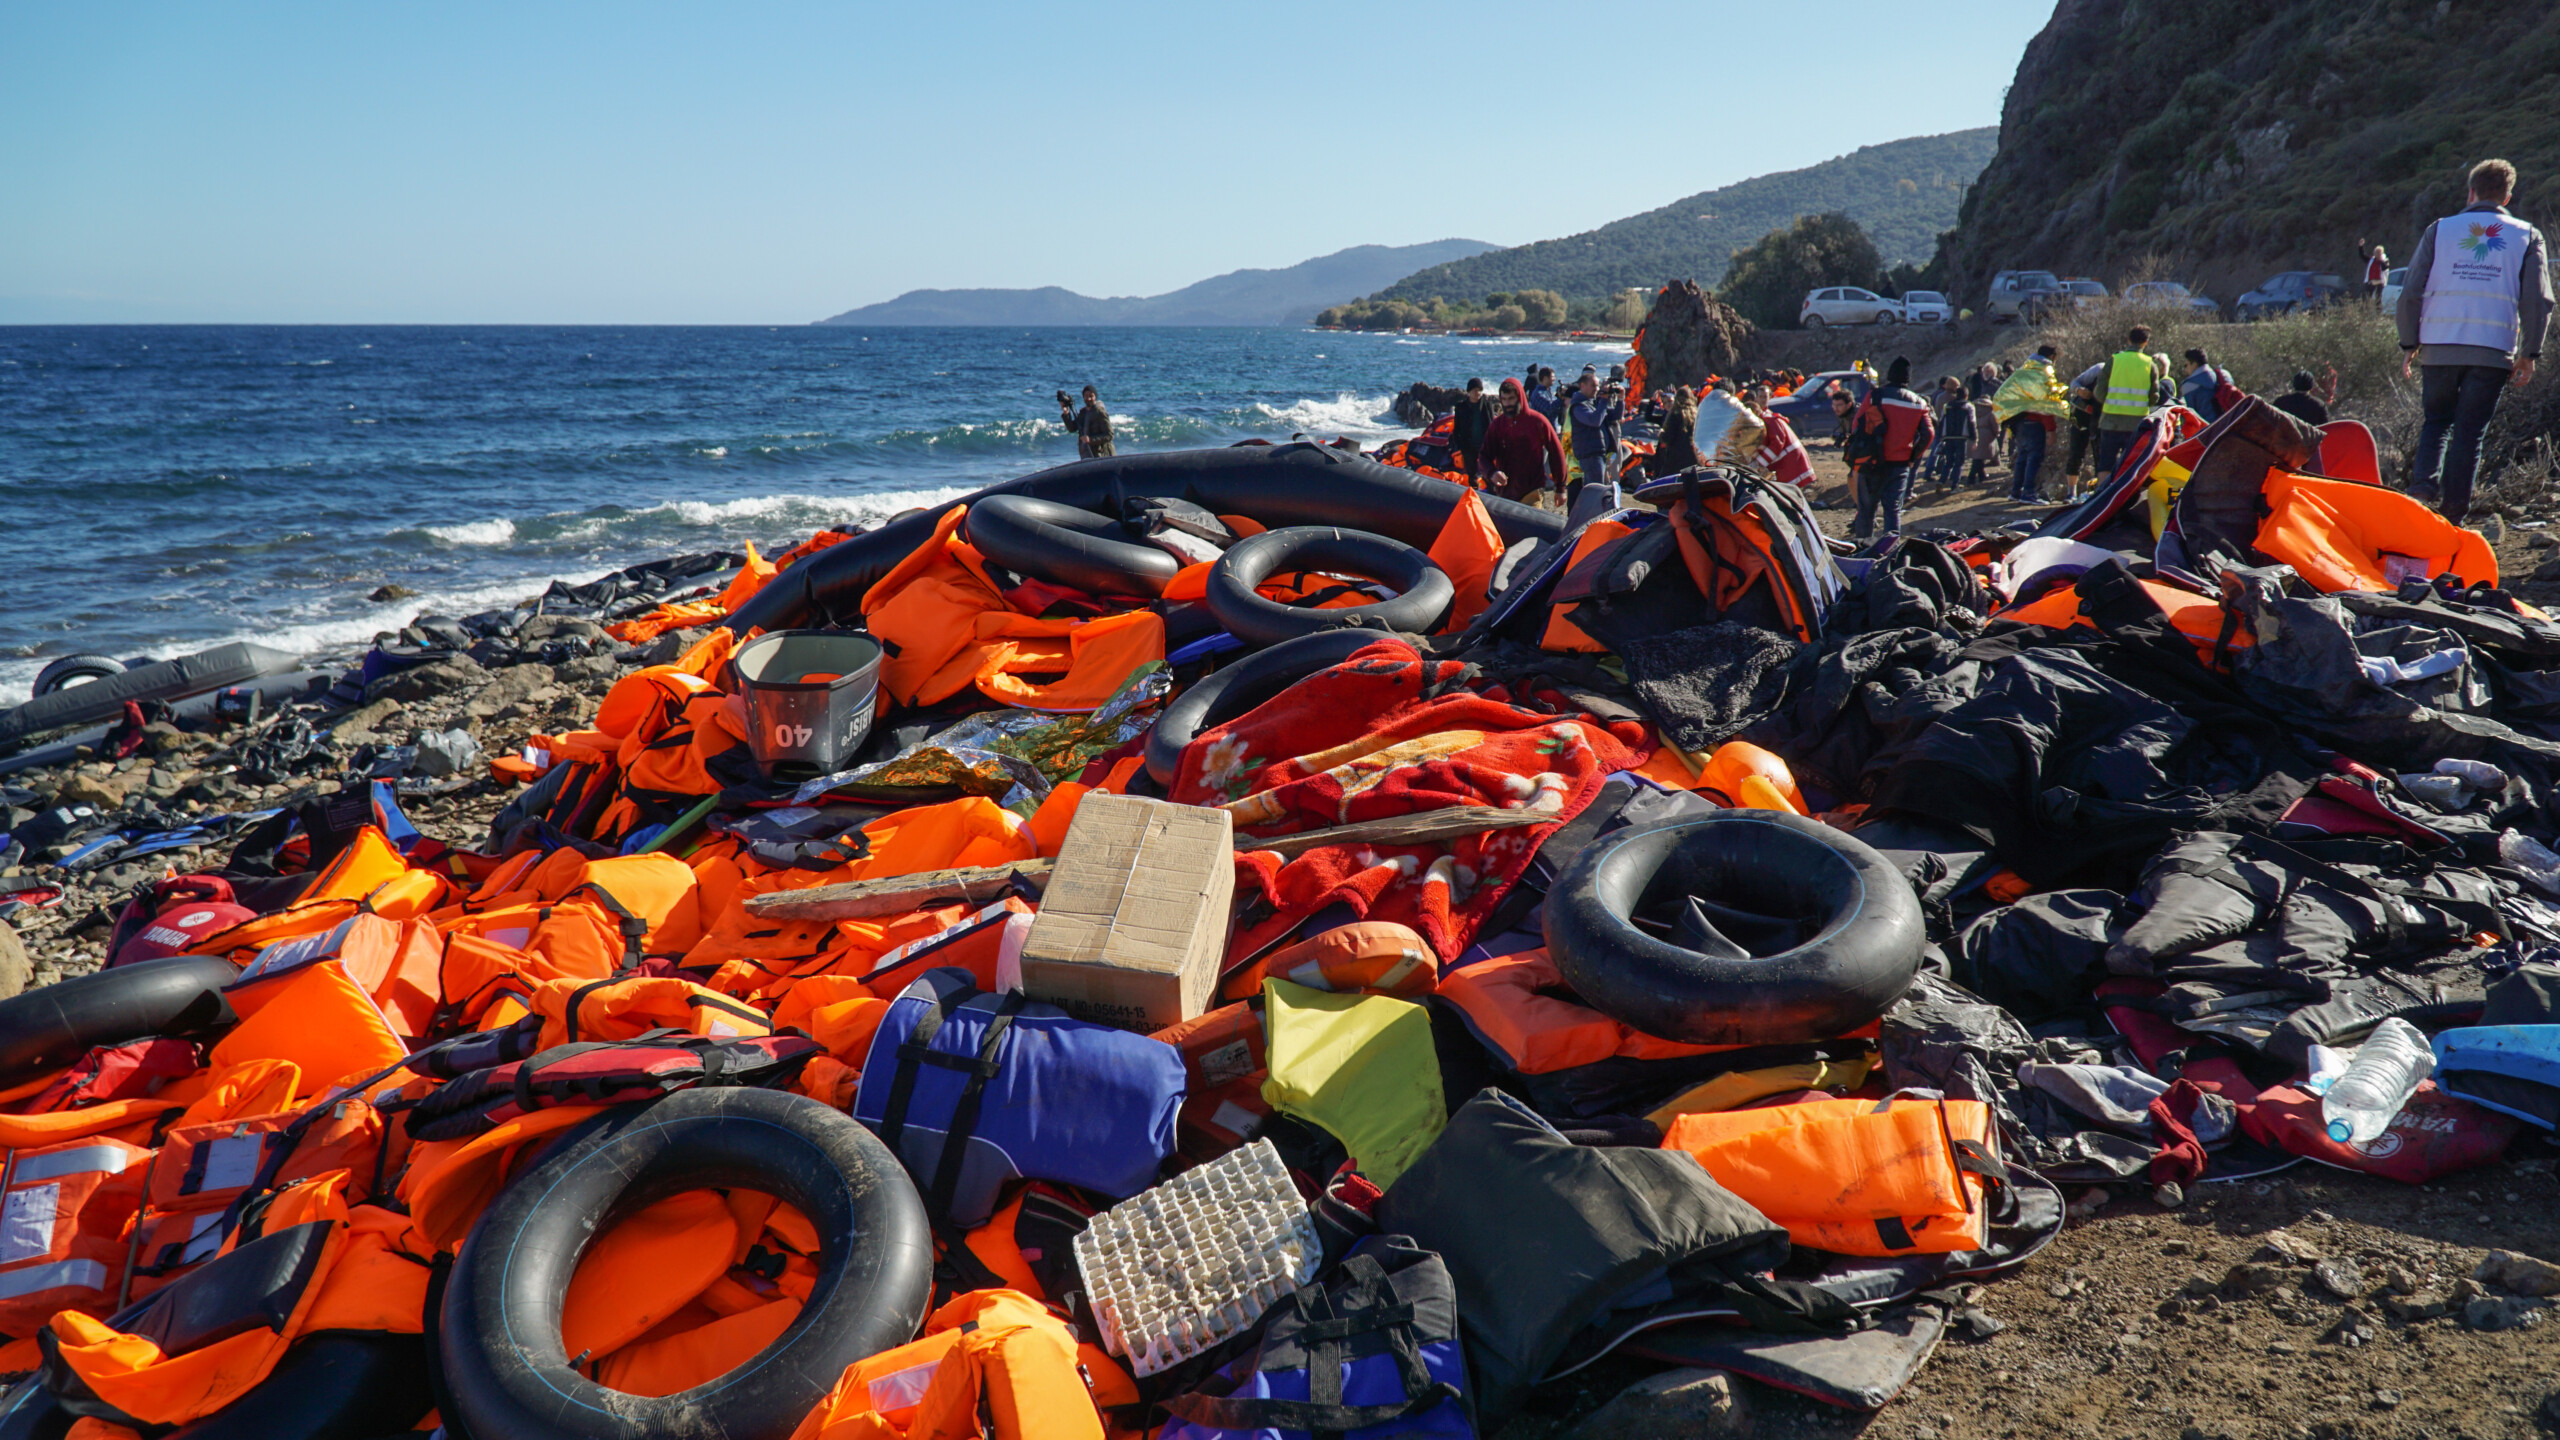 Refugees just arrived from Turkey on the boat to the shore of the Greek island of Lesbos. Abandoned belongings and life jackets on the shore of the island of Lesbos, which was previously used by the refugees. November 2015